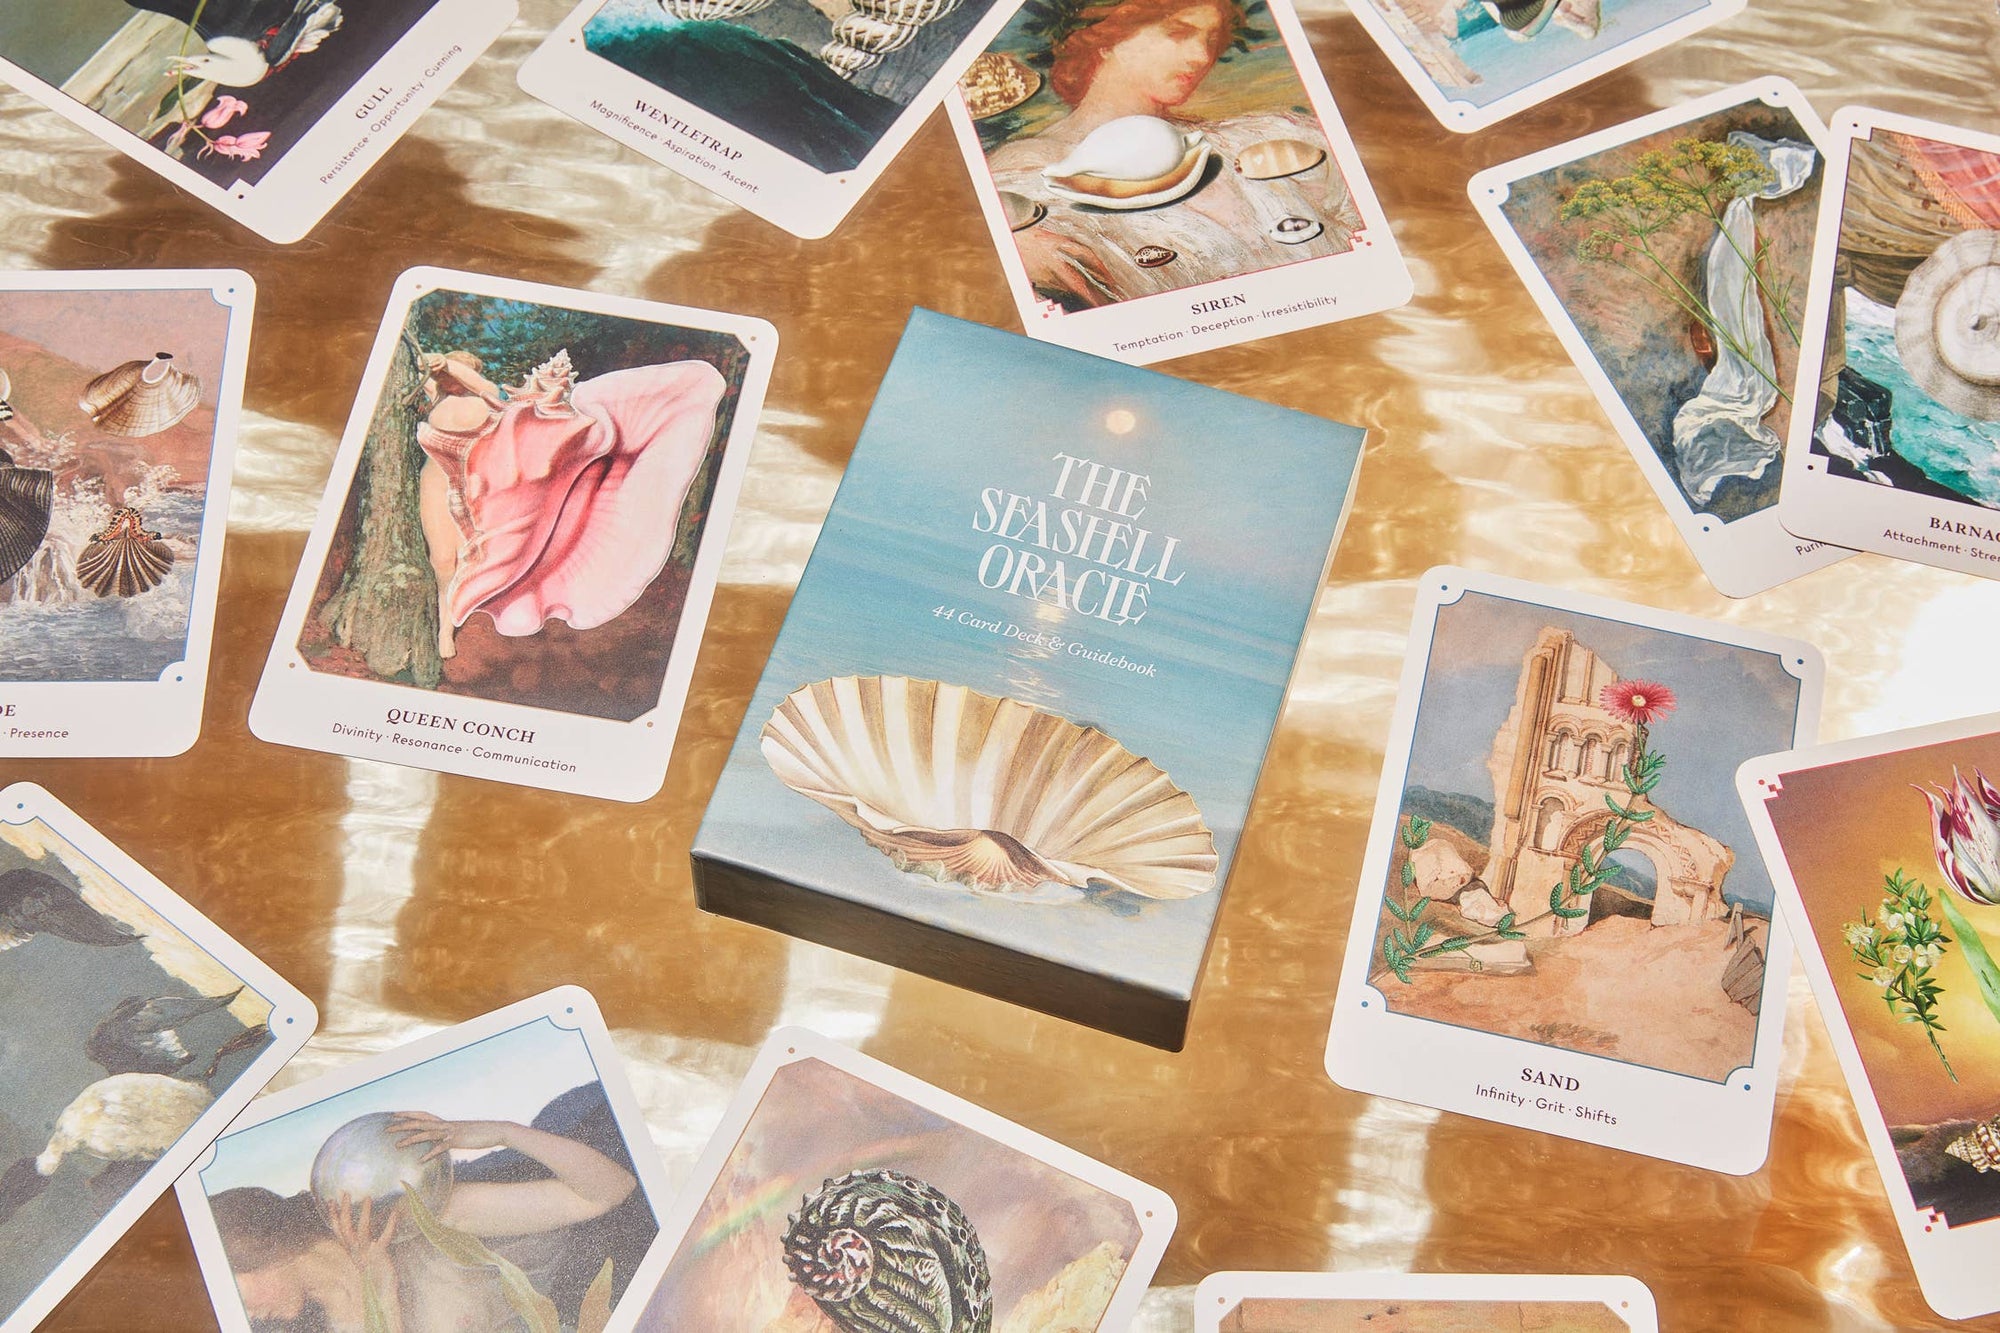 The Seashell Oracle: 44 Card Deck and Guidebook - Space Camp